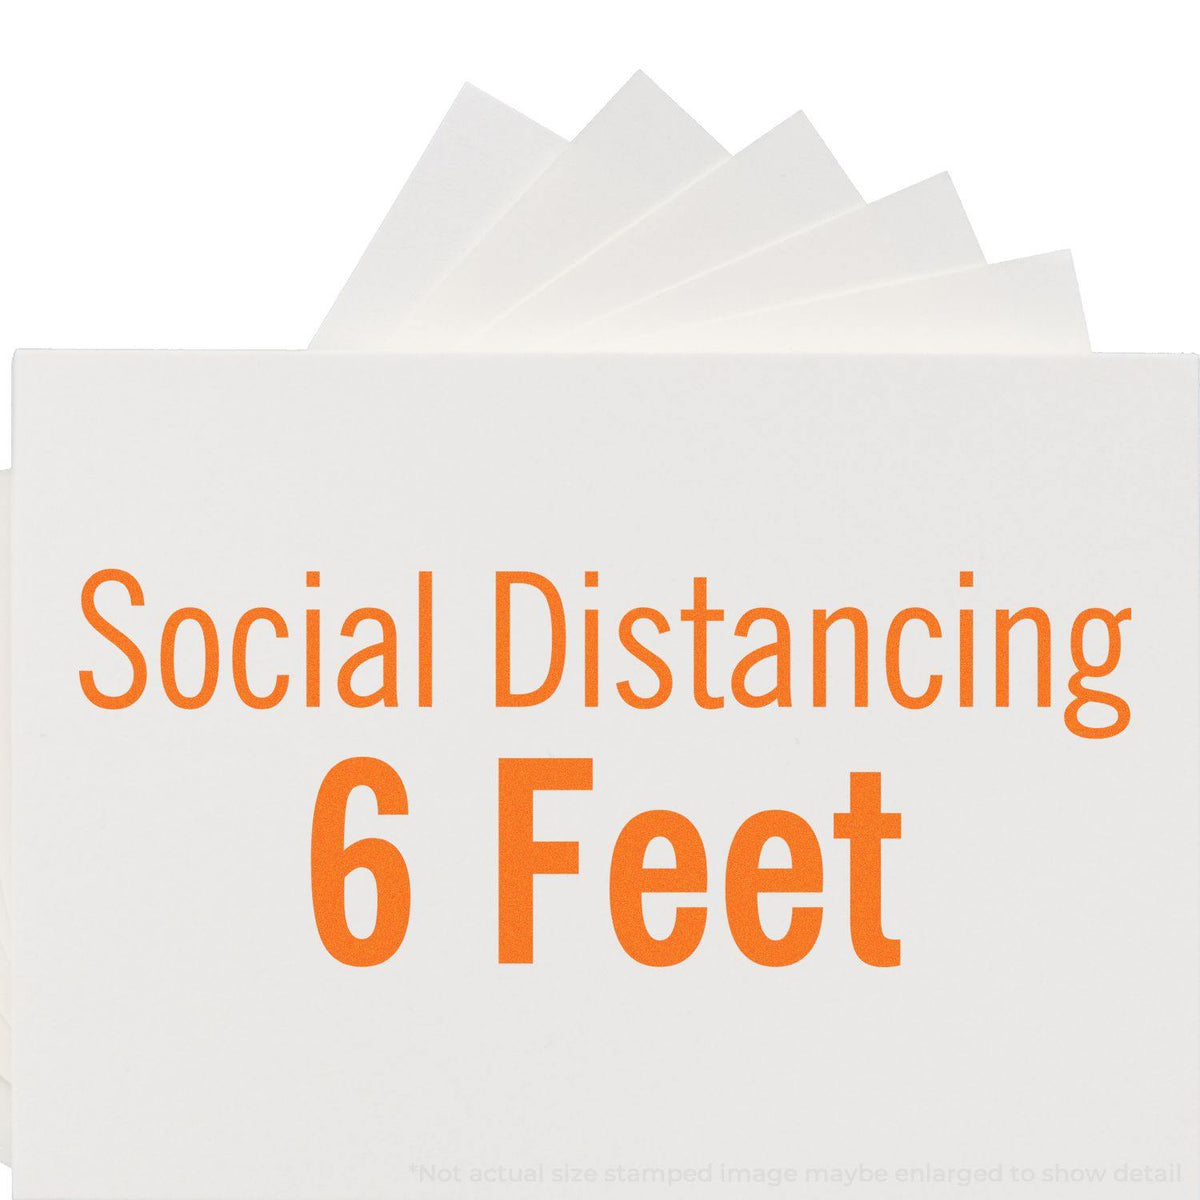 Large Pre-Inked Social Distancing 6 Feet Stamp Lifestyle Photo